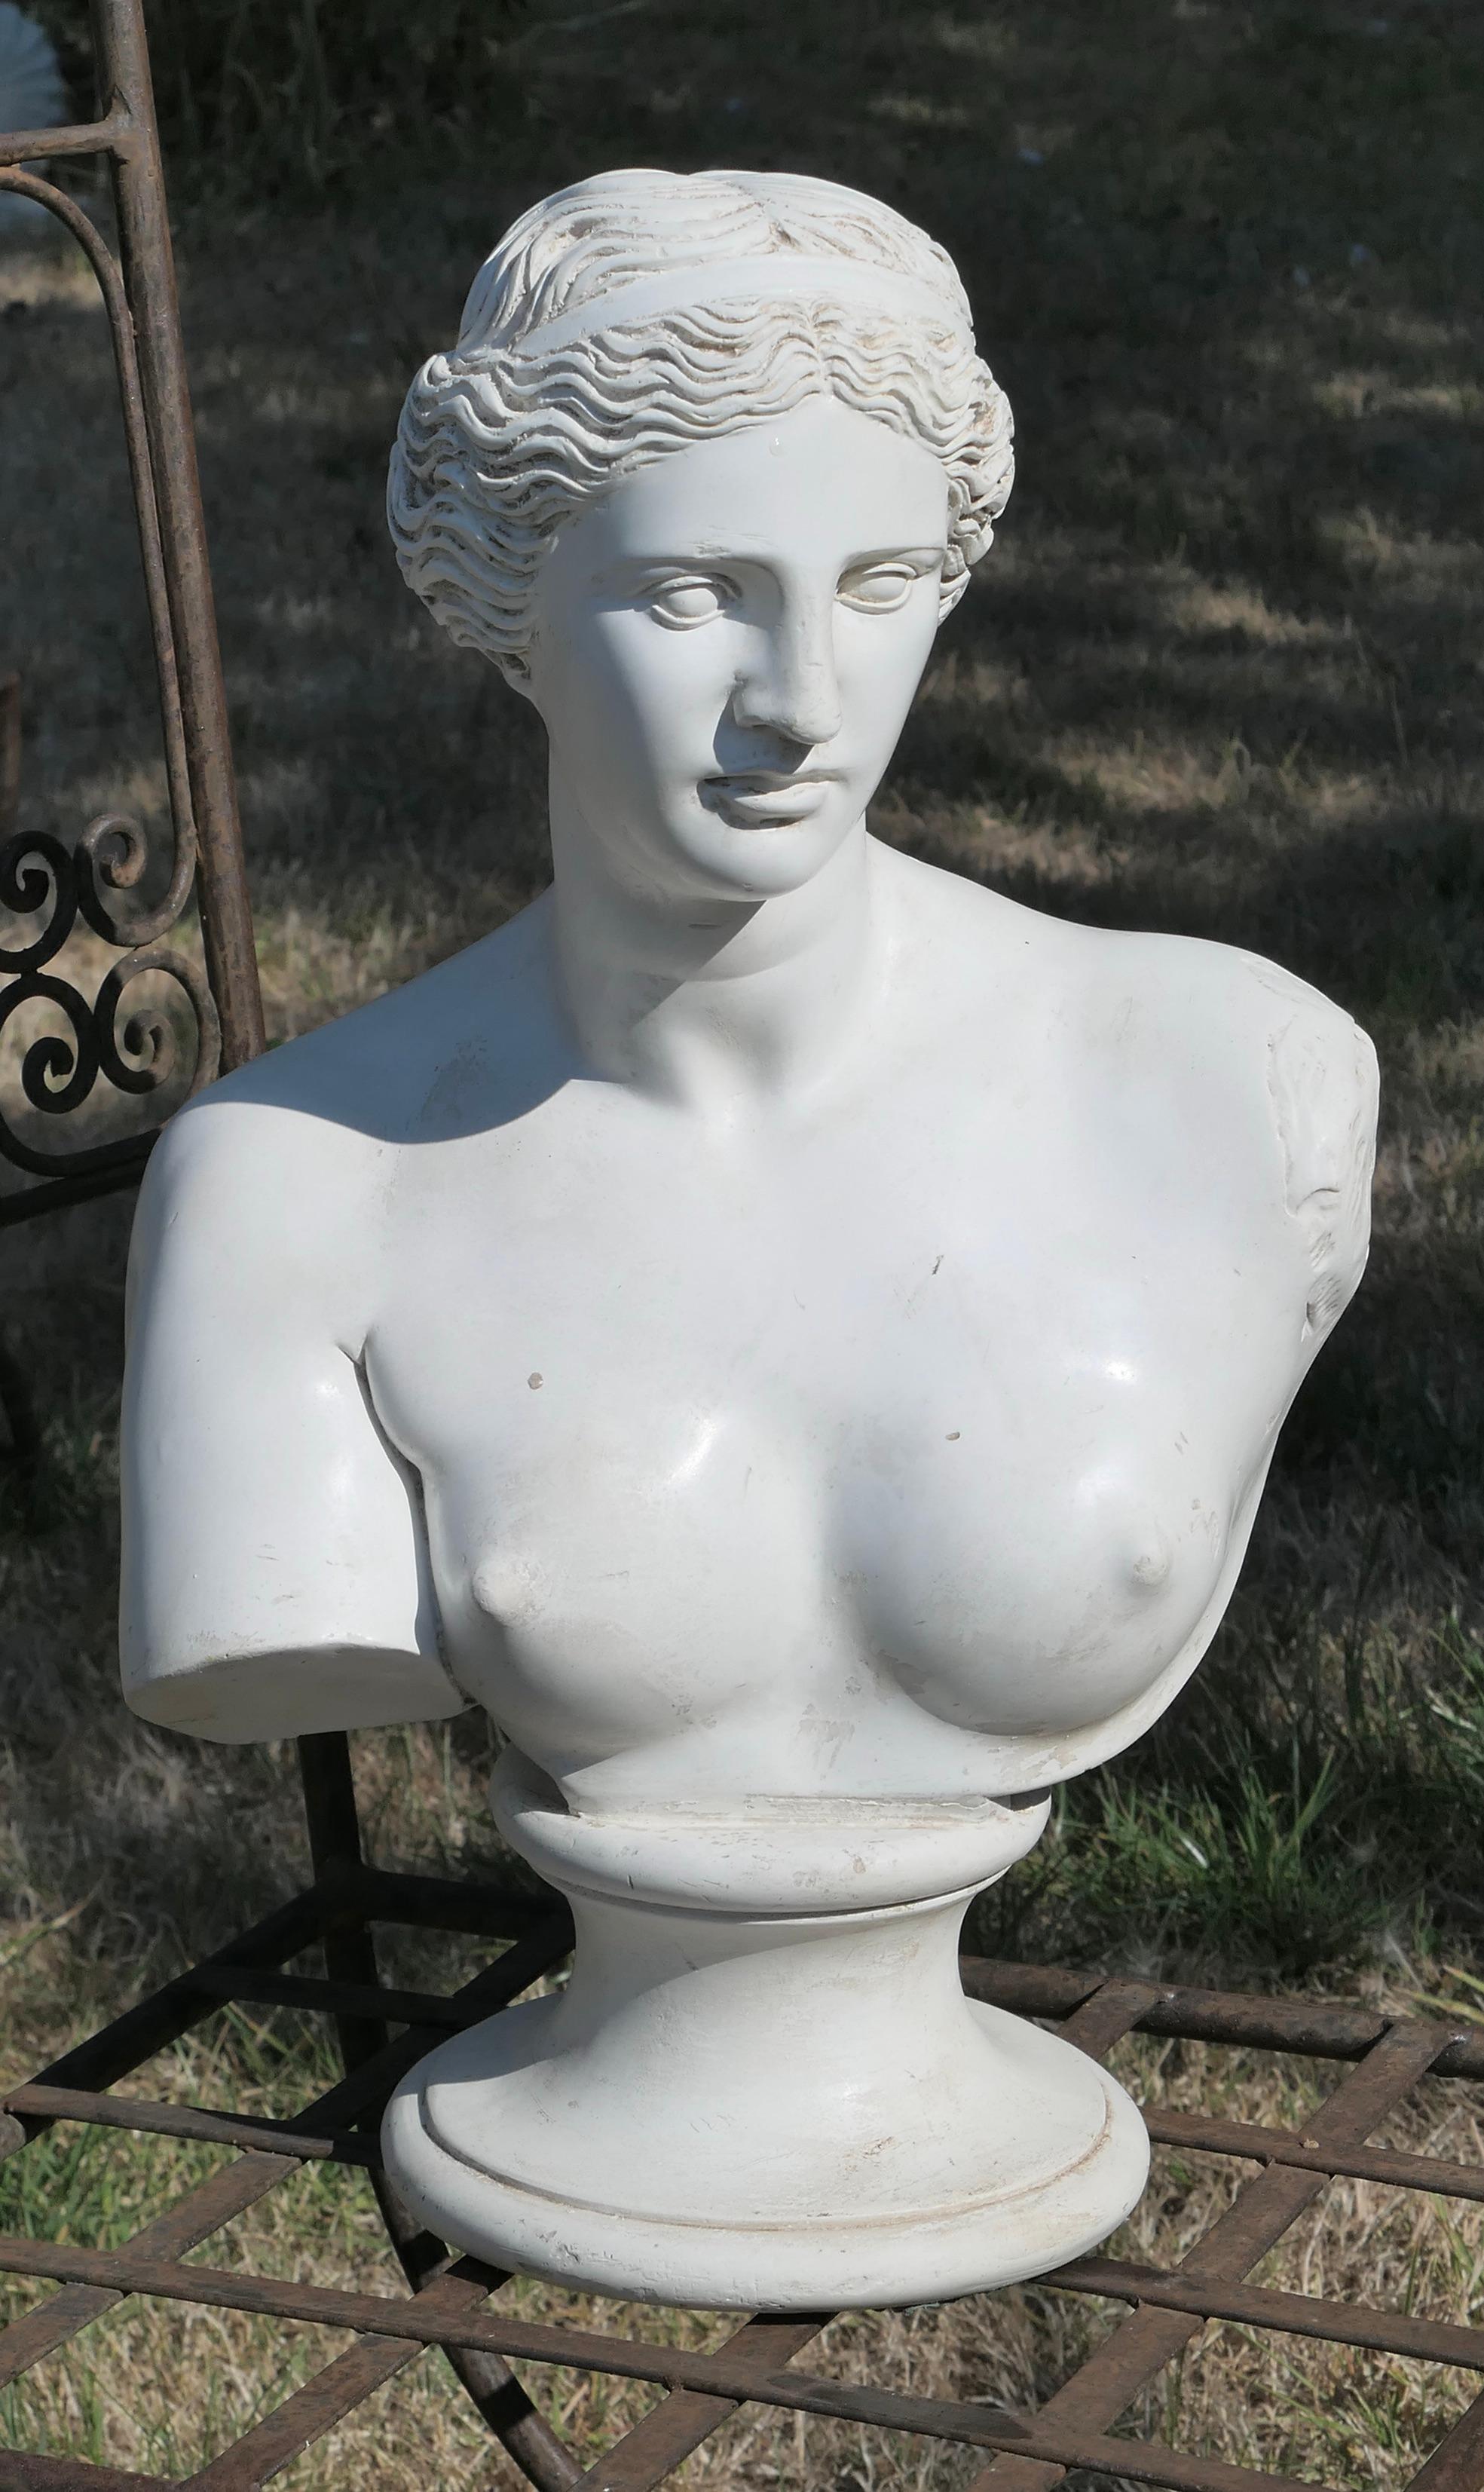 Good plaster bust of the Venus de Milo.
 
A good plaster bust of the Venus de Milo this is a good quality bust, it is made in plaster and has a good aged patina 
The Bust shows in fine detail some of the damage on the right hand side of the